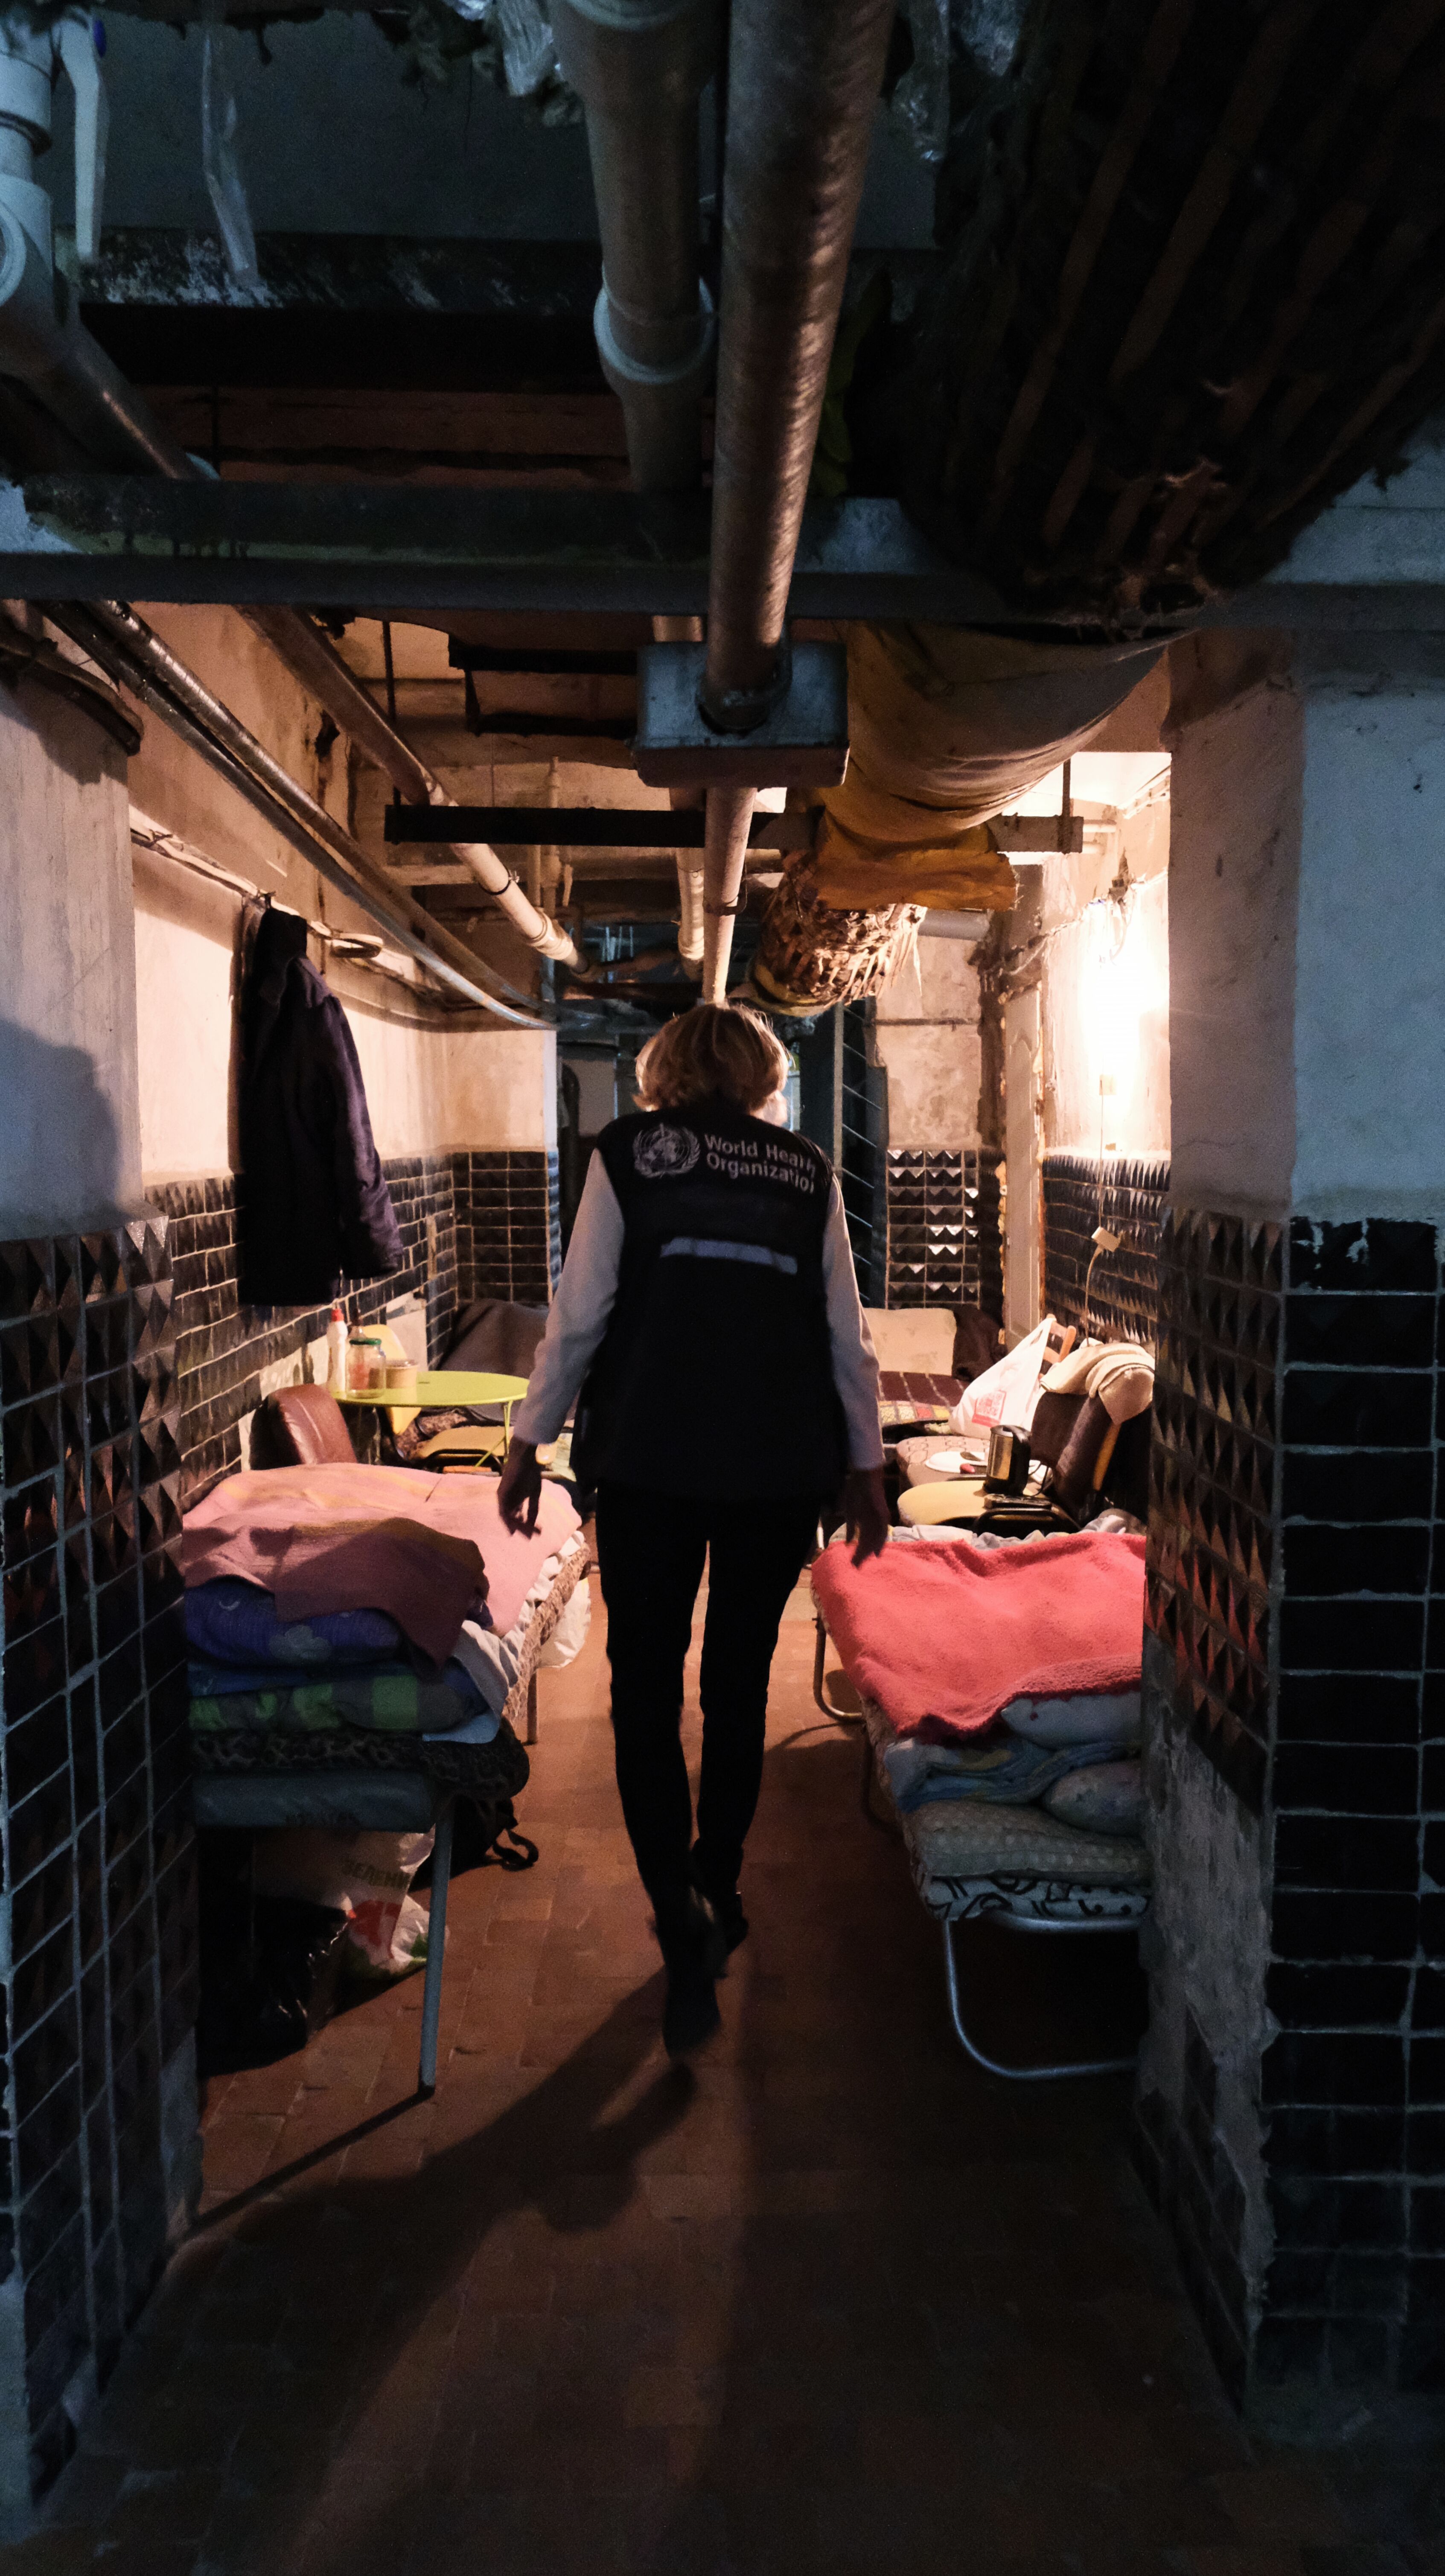 Health workers moved their patients, their beds, their equipment and themselves down to the bomb shelters built in the basements decades before during the cold war era.